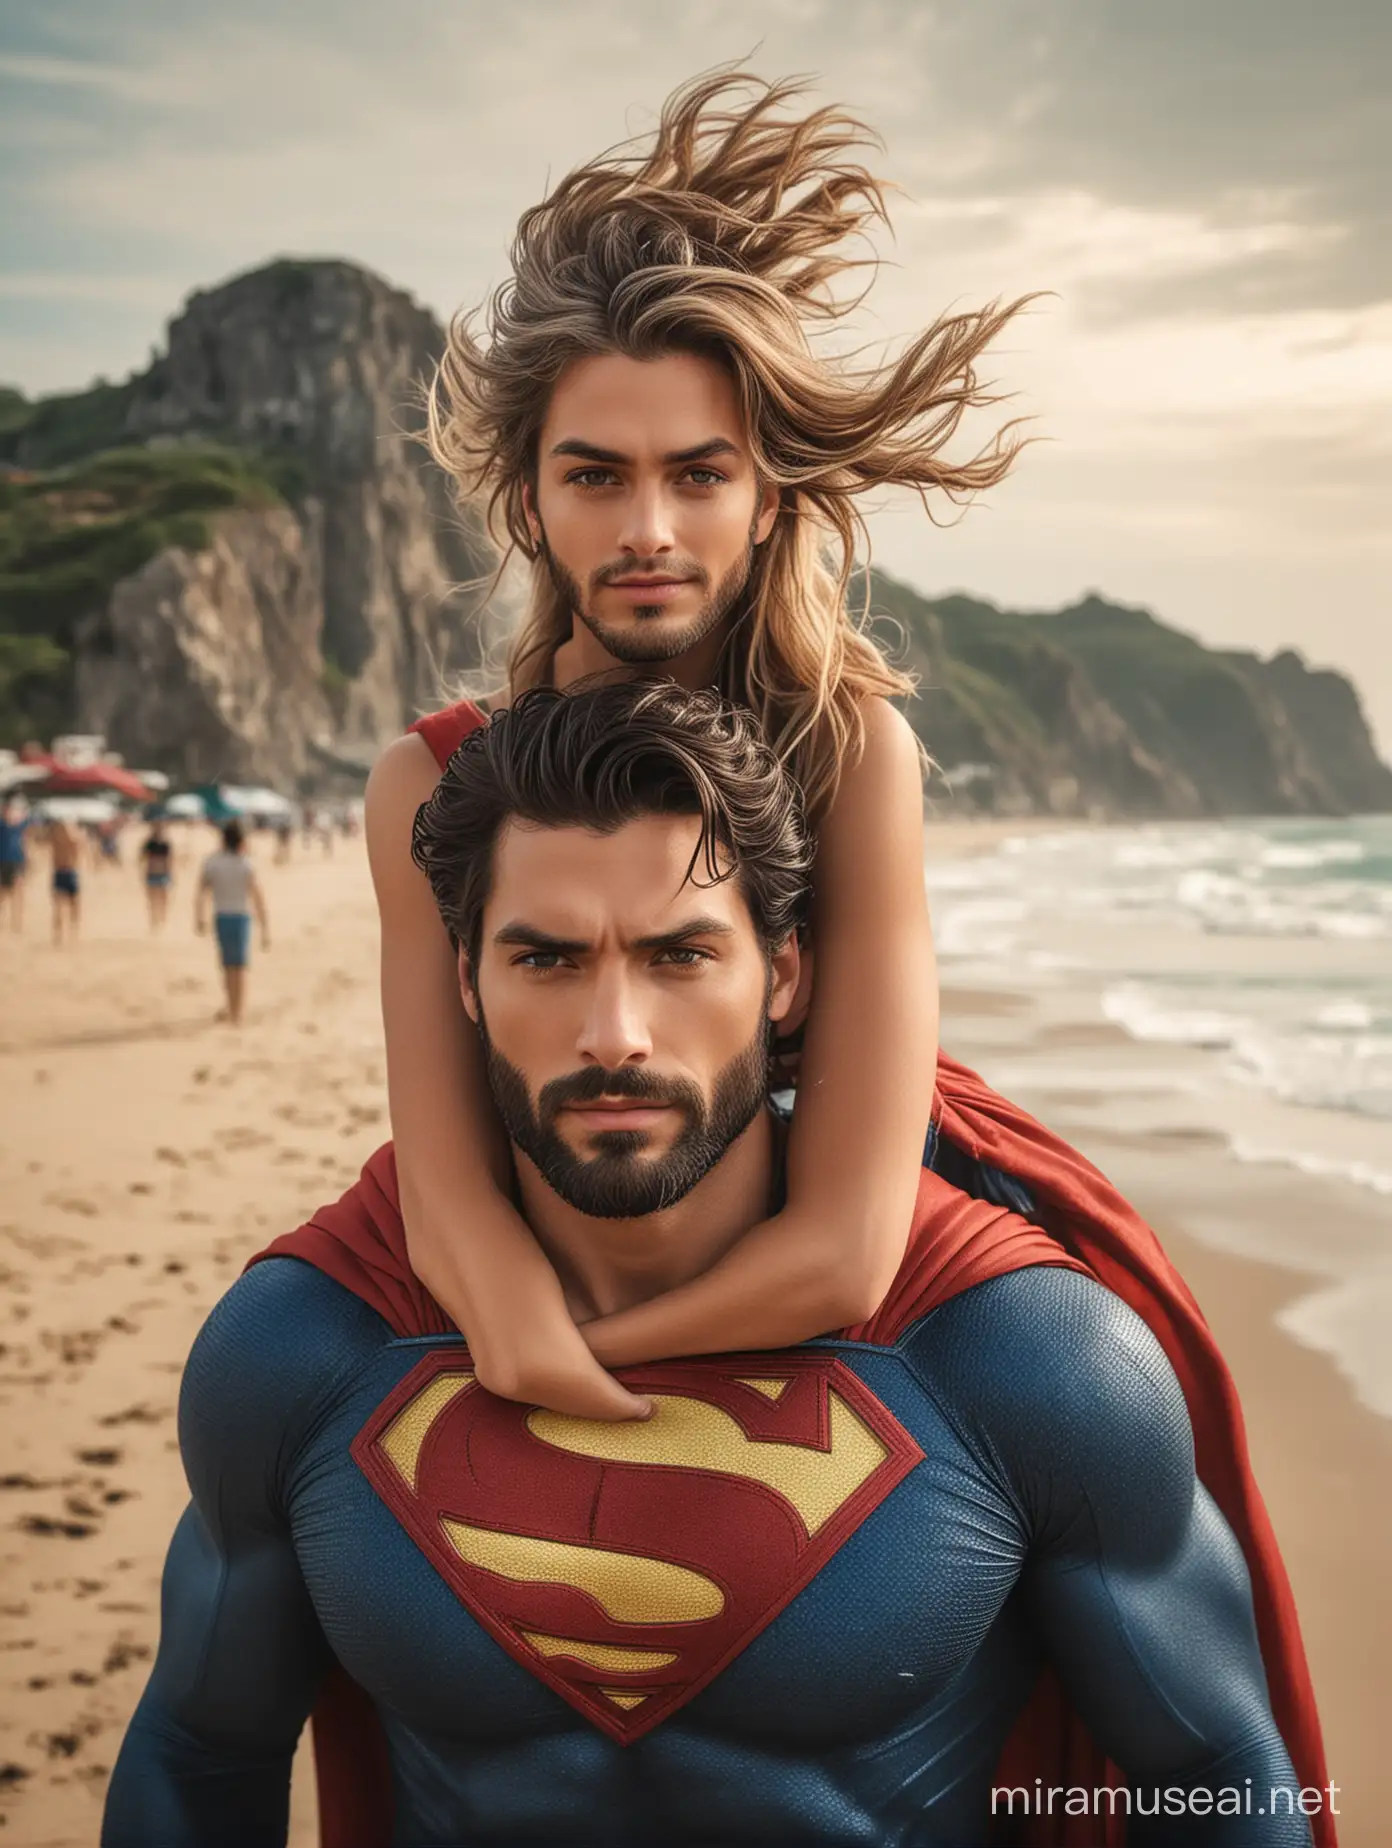 Superman Carrying Girl on Shoulders at Beach